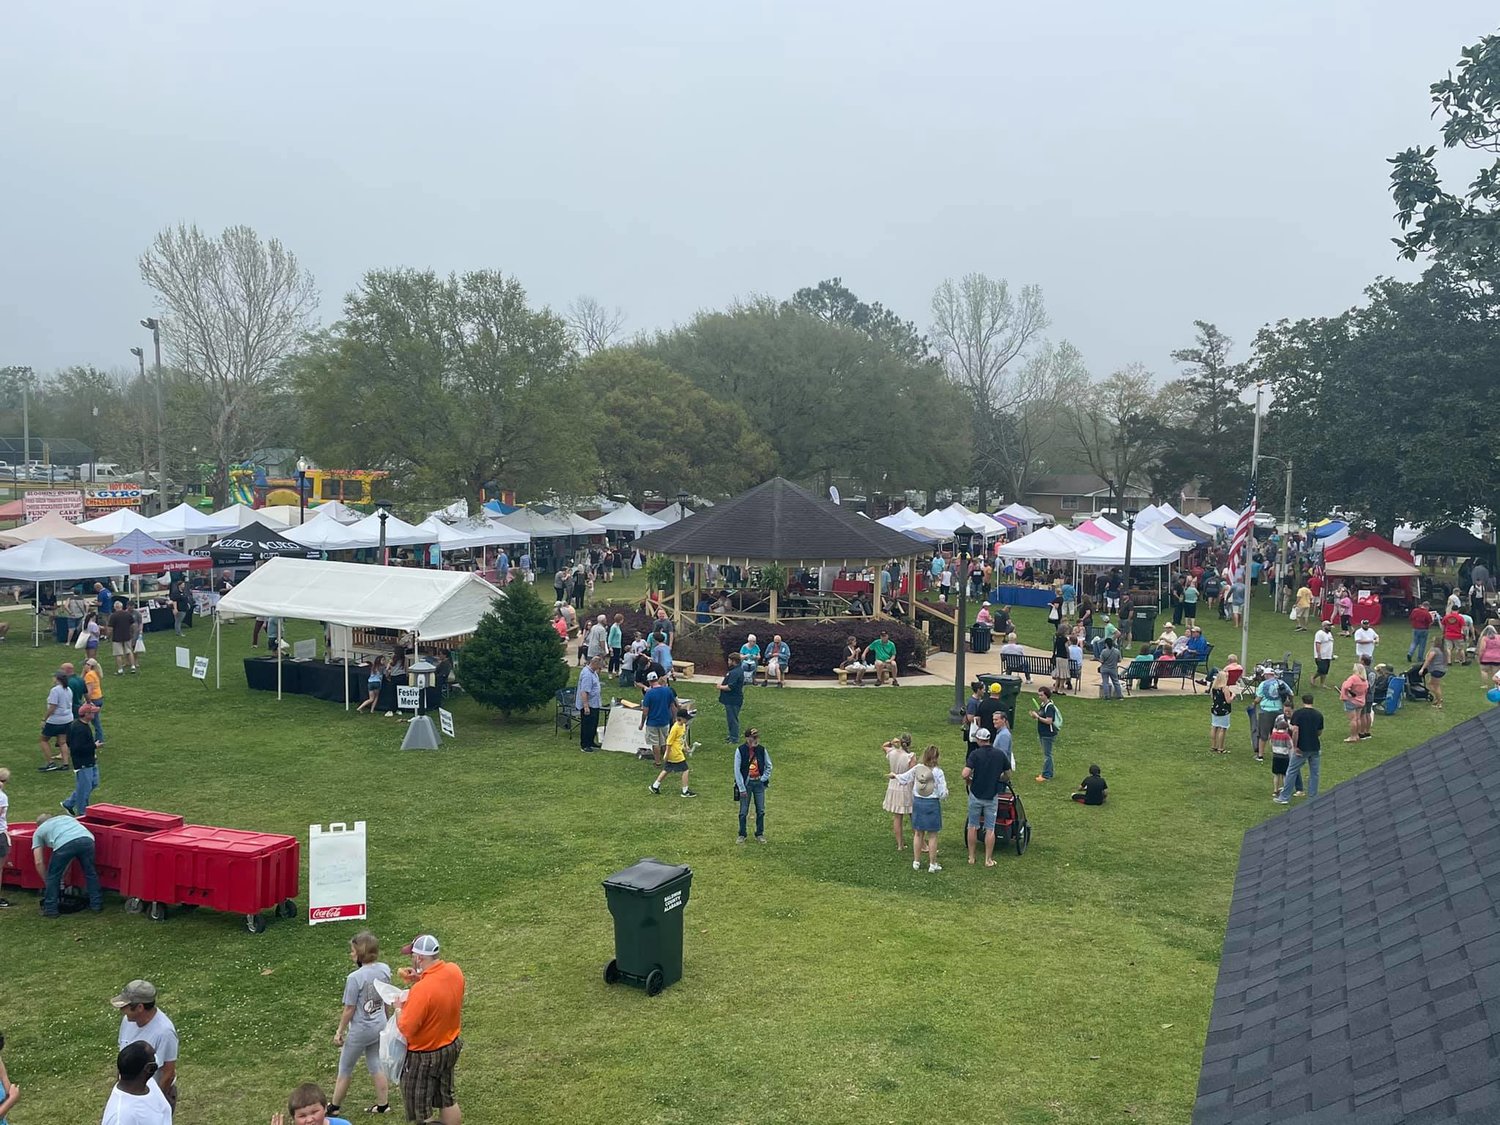 Record crowds came out to enjoy the Elberta German Sausage Festival in March 2021.